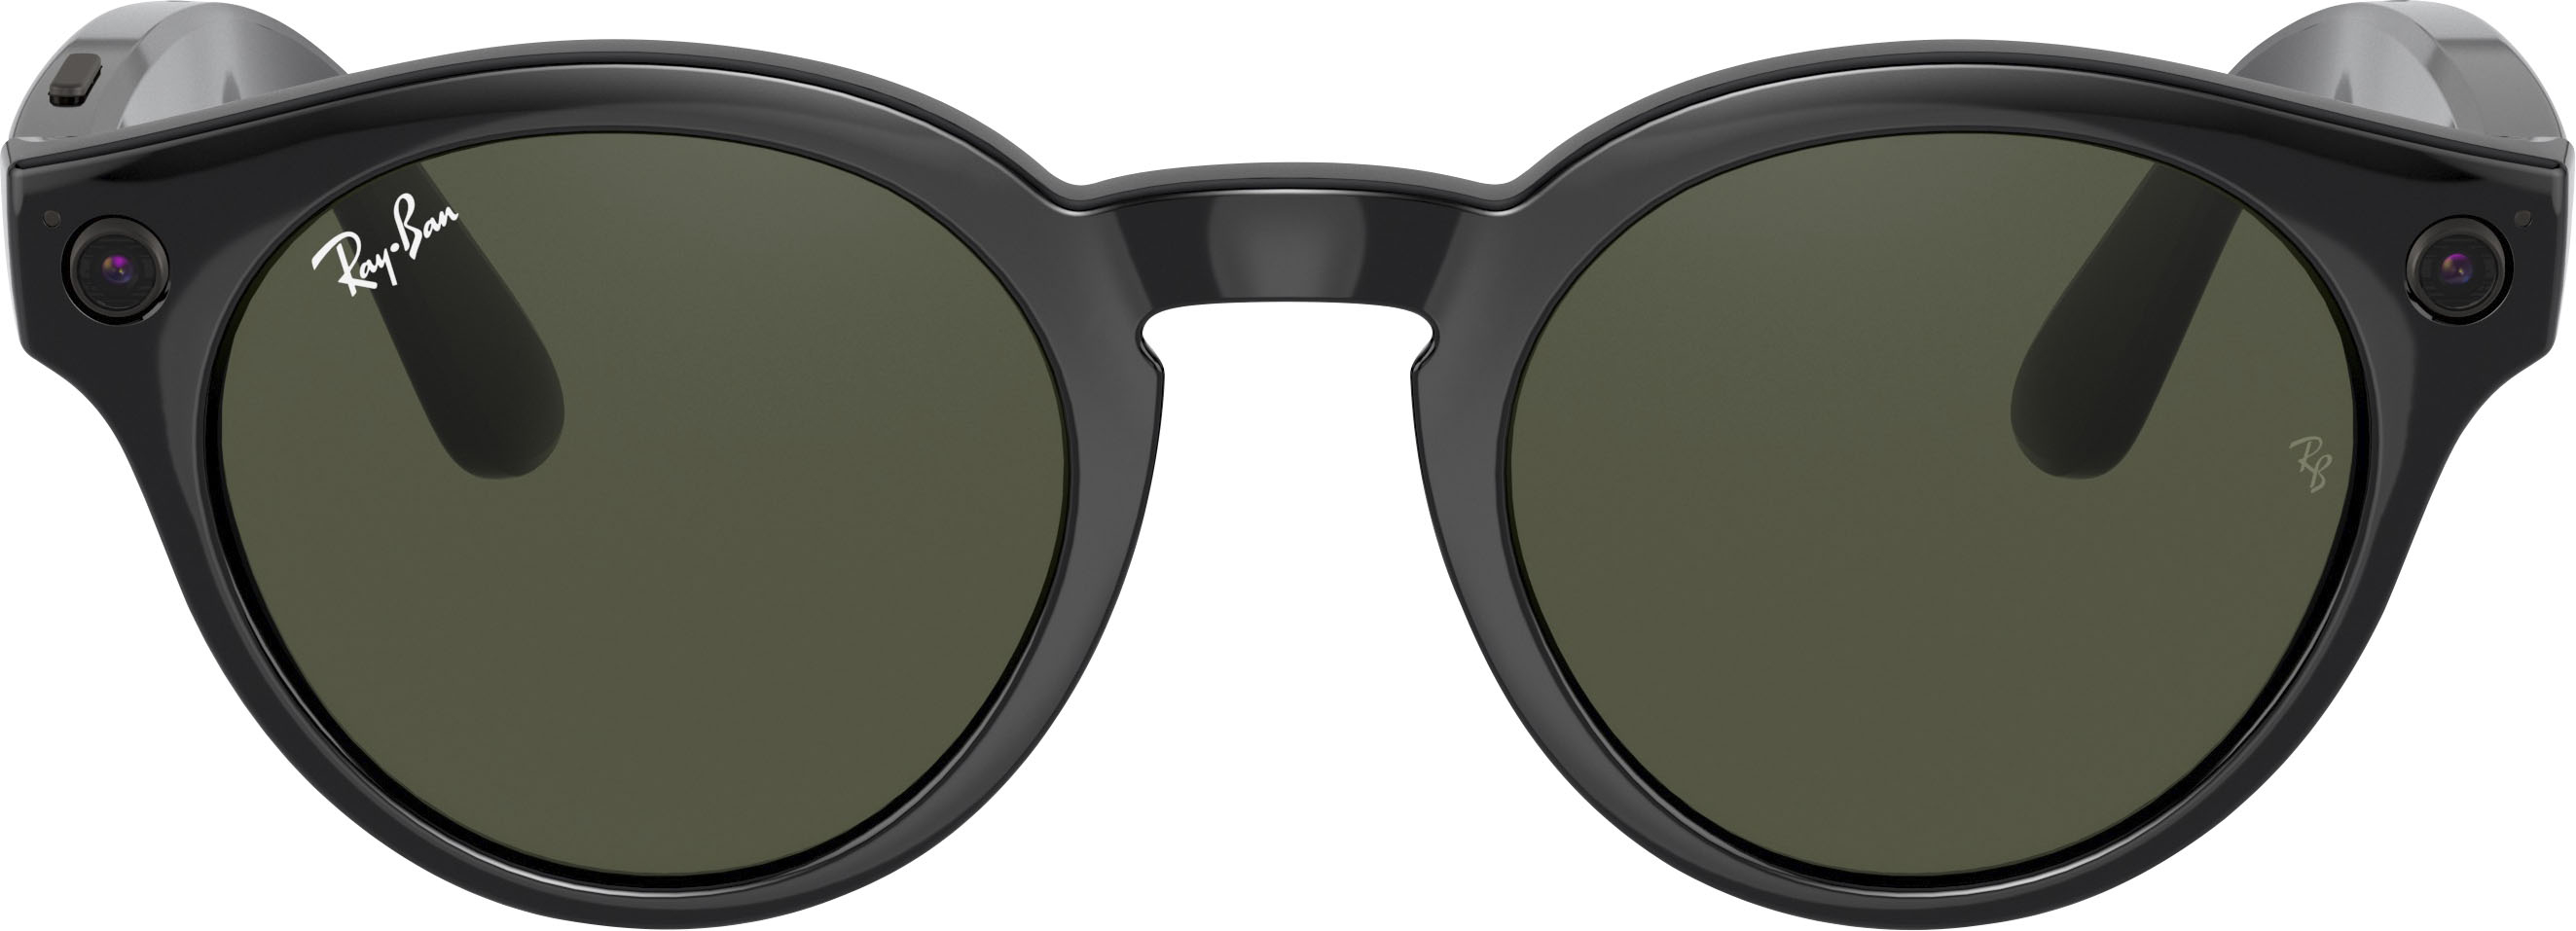 Zoom In On Angle Zoom. Ray-Ban - Stories Round Smart Glasses - Shiny Black/Green.